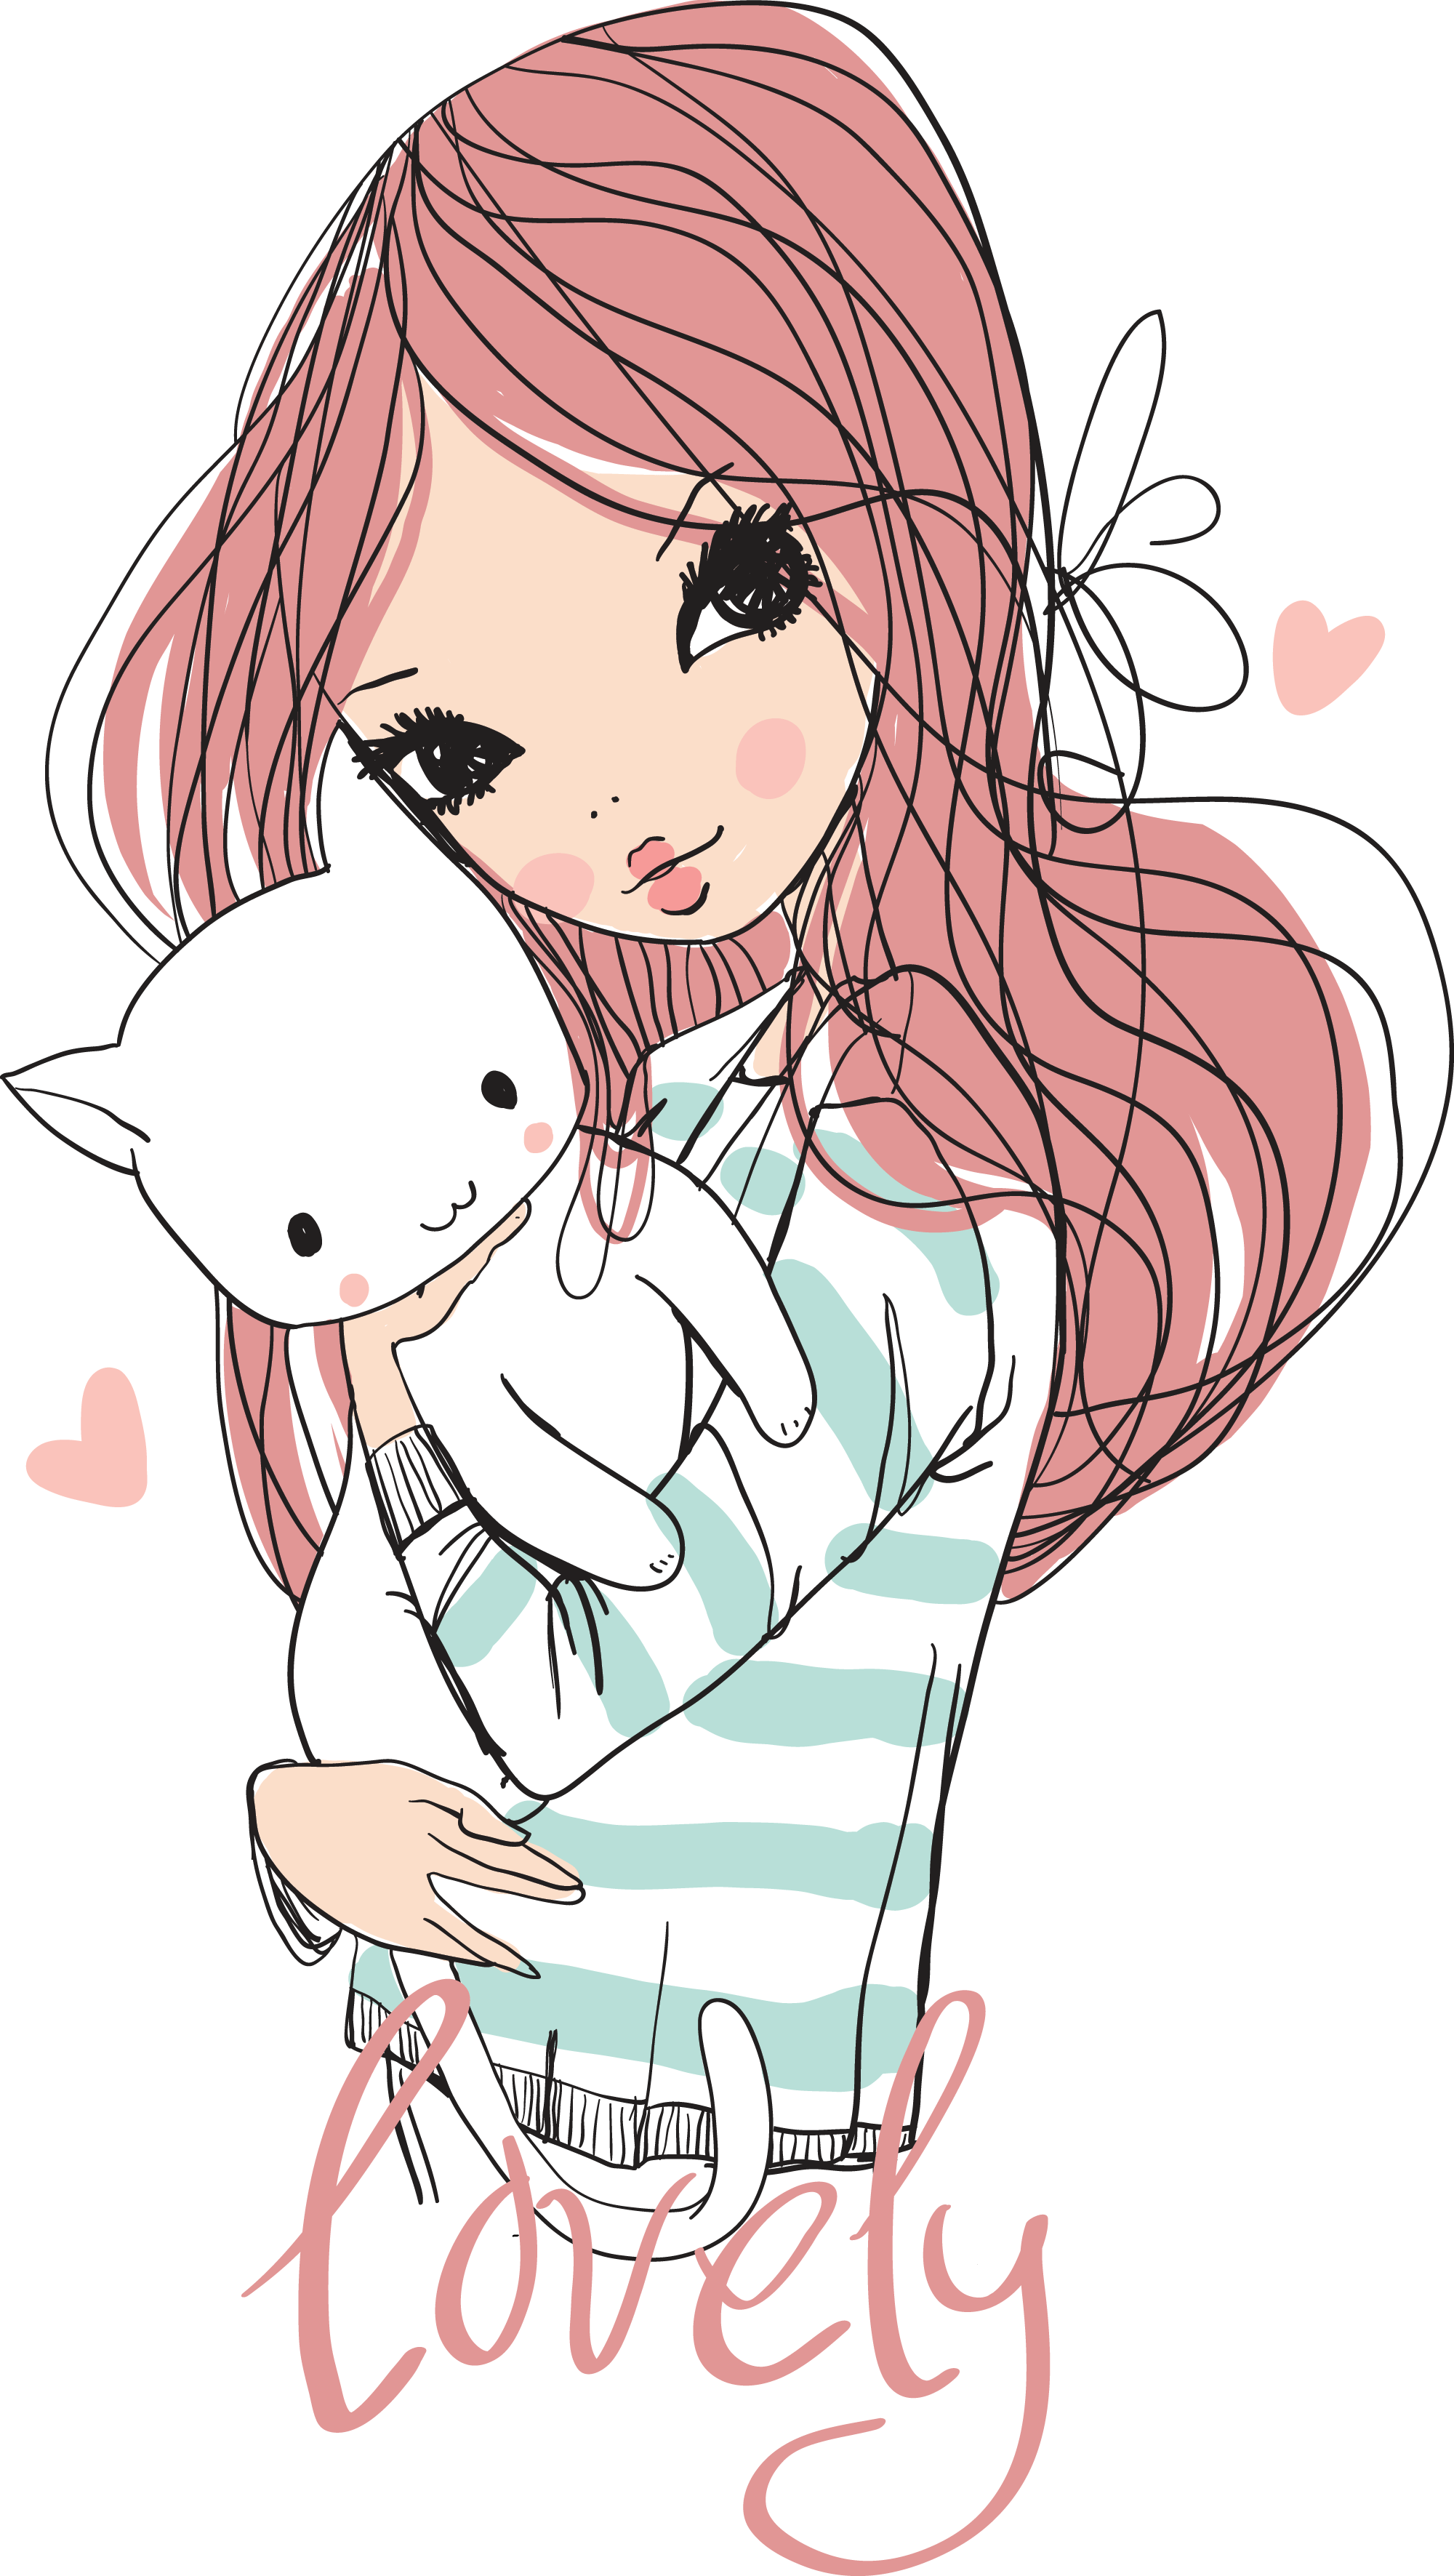 Cute Drawings Of Girls PNG HD Quality